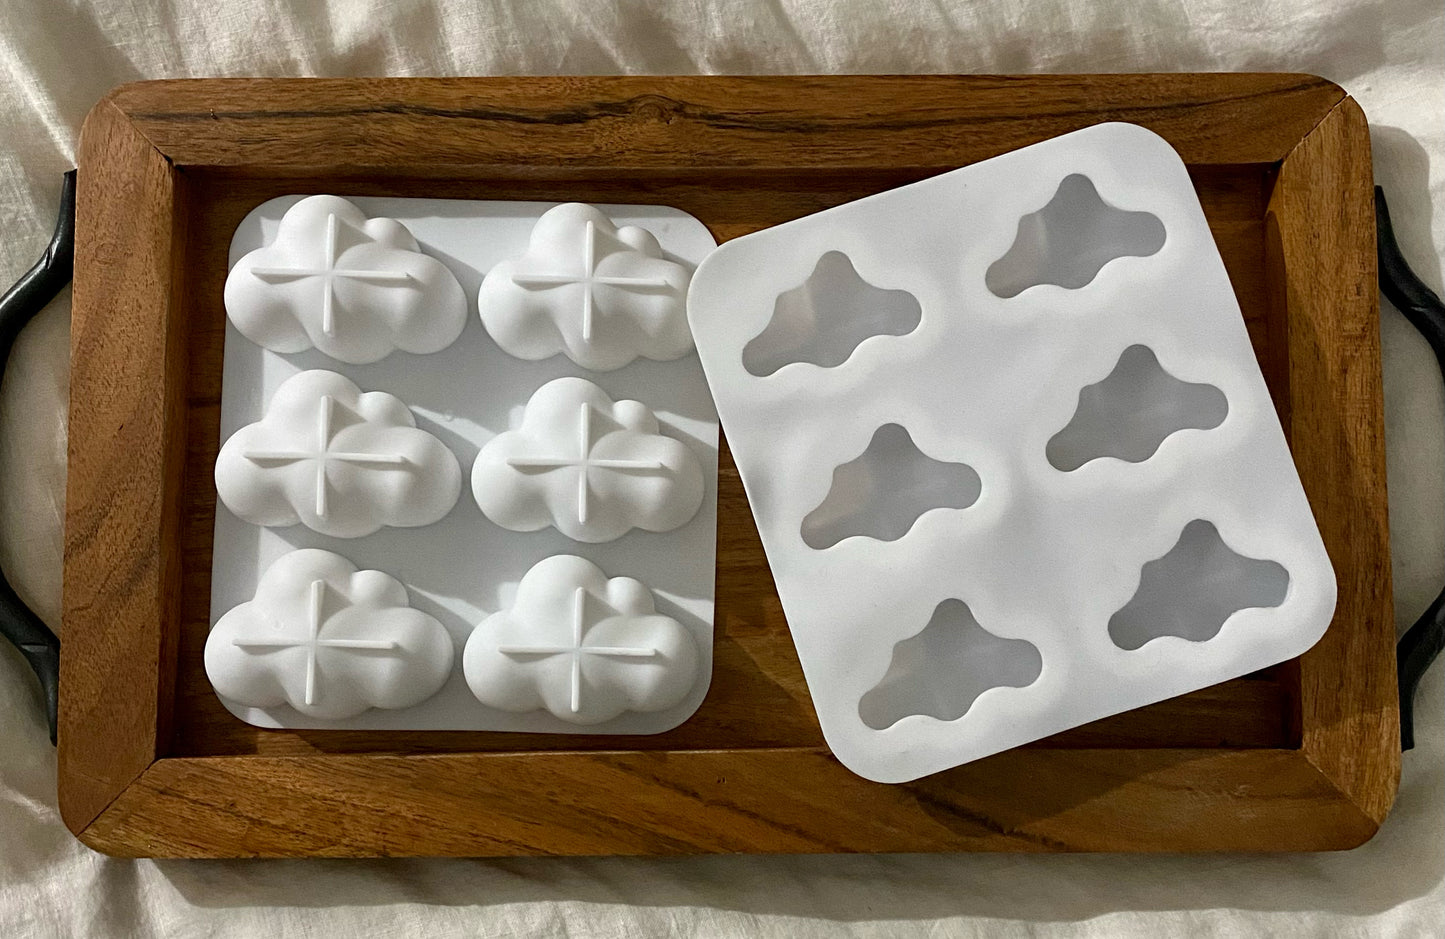 15 Count Ominous Blend & Cloud Ice Tray